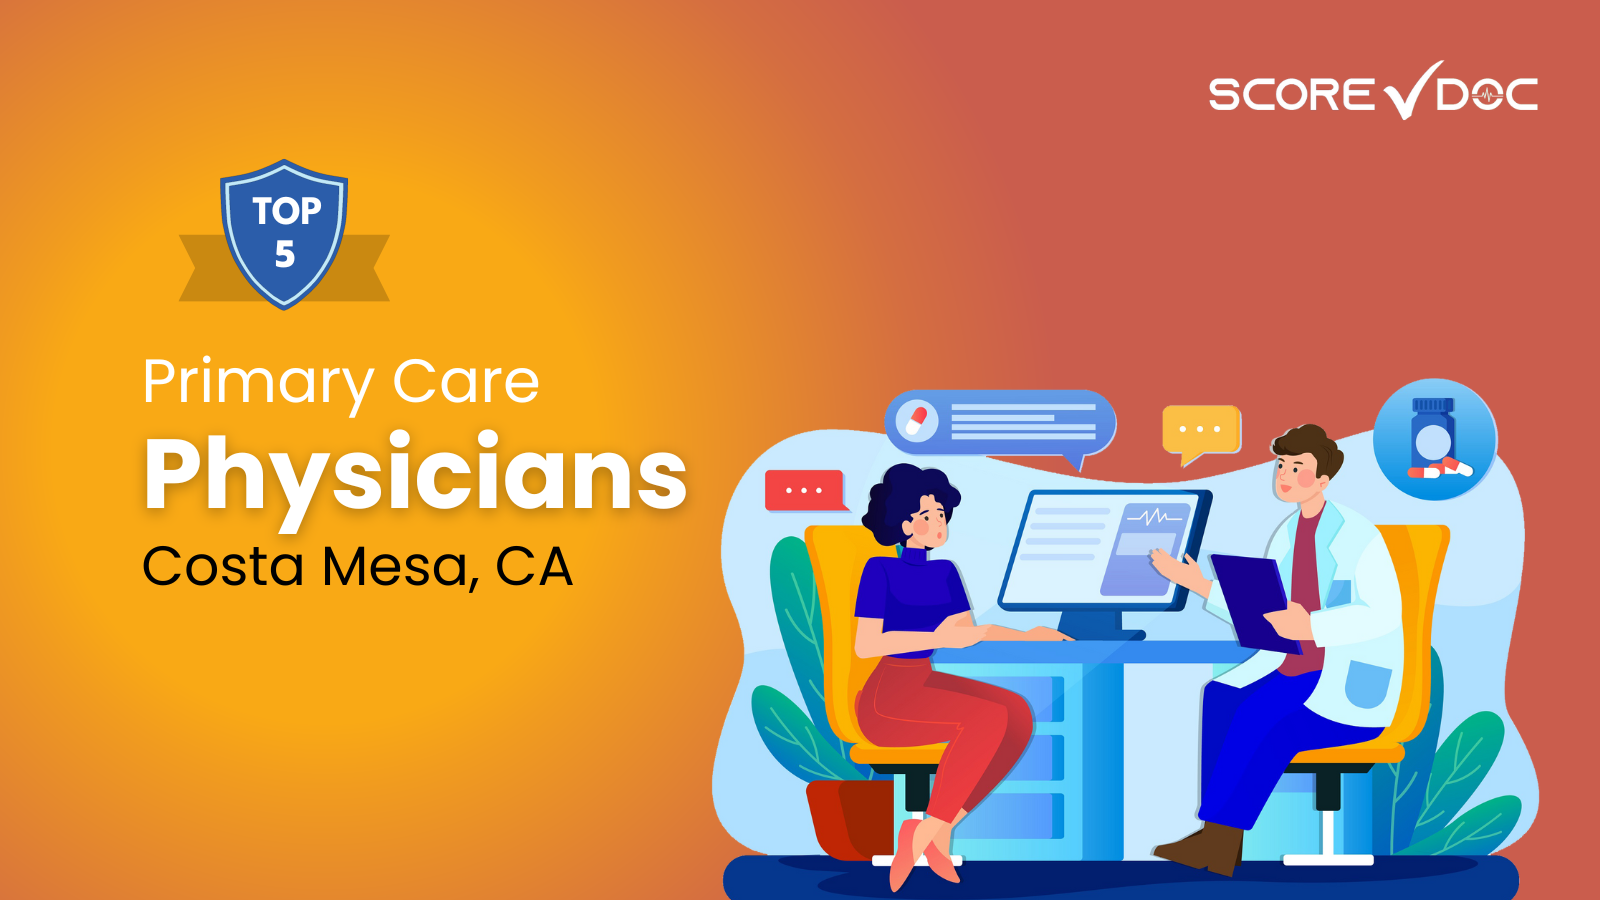 5 Top-Rated Primary Care Physicians in Costa Mesa, CA